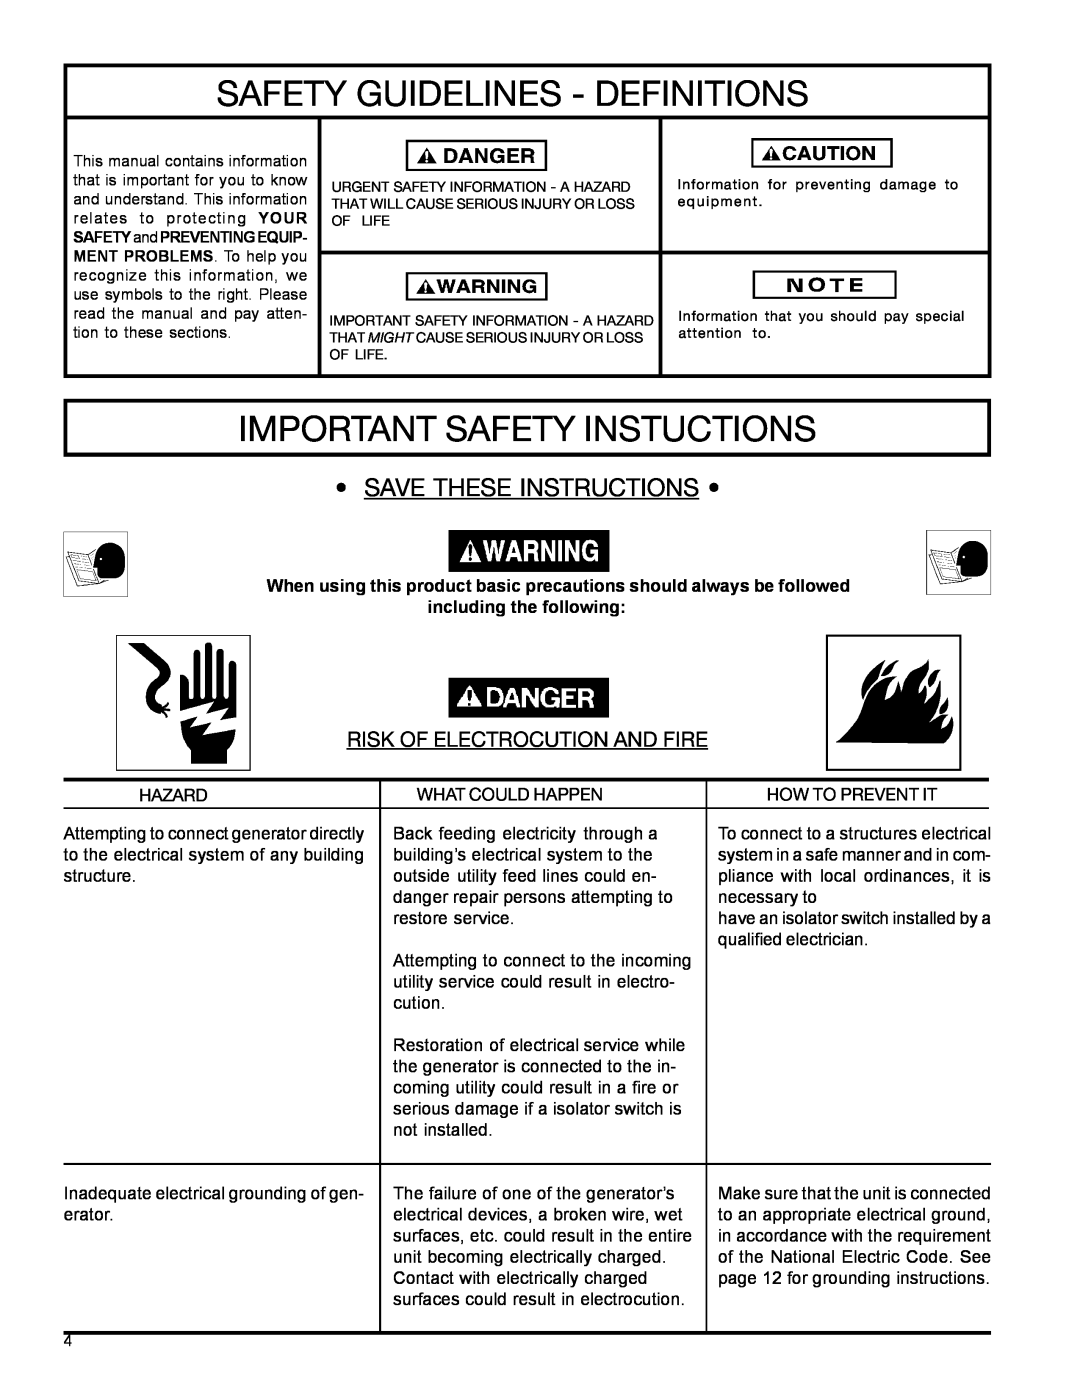 DeVillbiss Air Power Company MGP-4600 owner manual Safety Guidelines - Definitions, Important Safety Instuctions 